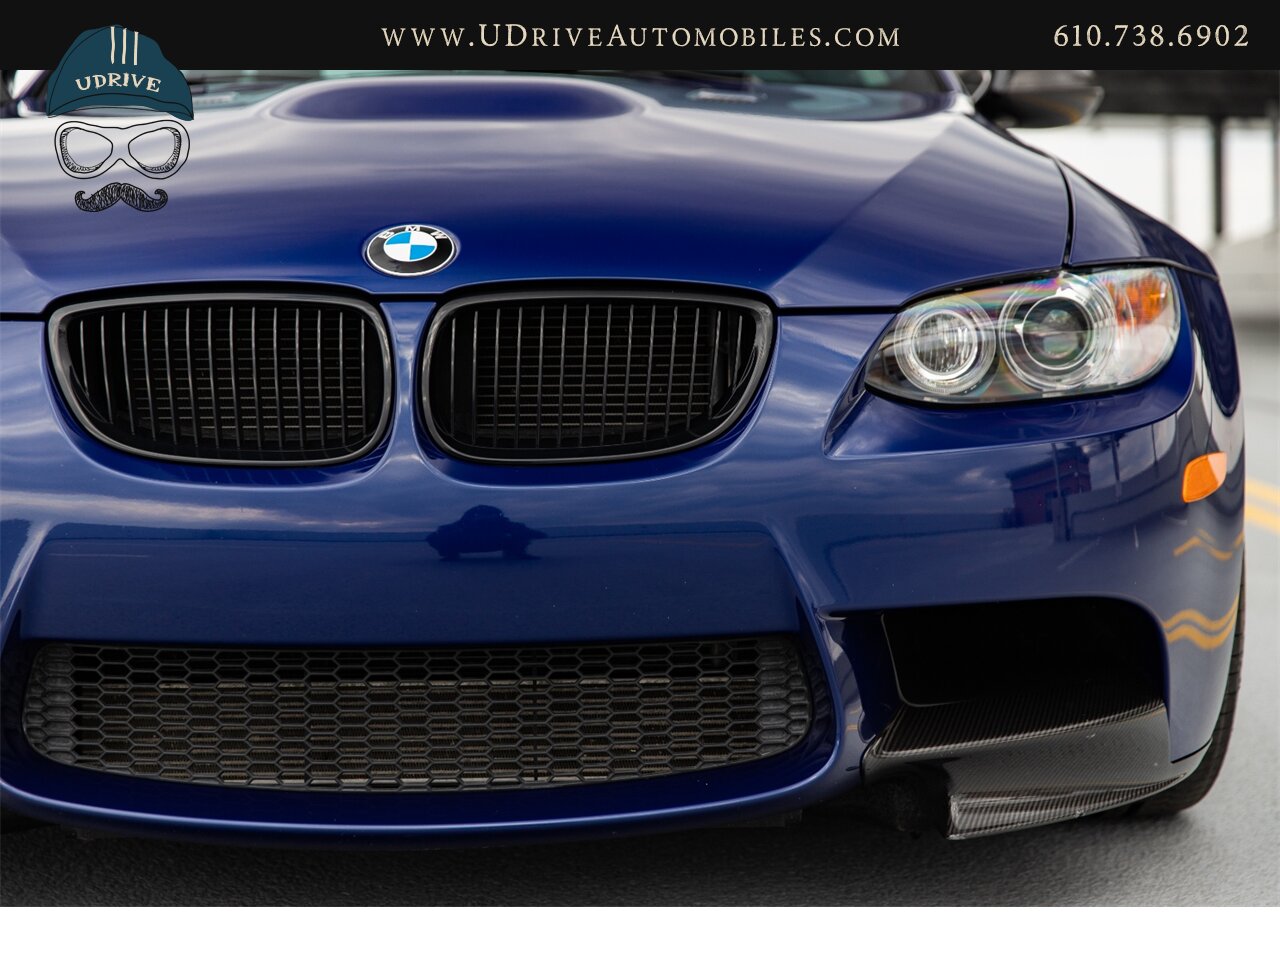 2011 BMW M3 E92 6 Speed Manual Competition Pkg Interlagos Blue  16k Miles Nav PDC EDC Comf Acc - Photo 12 - West Chester, PA 19382